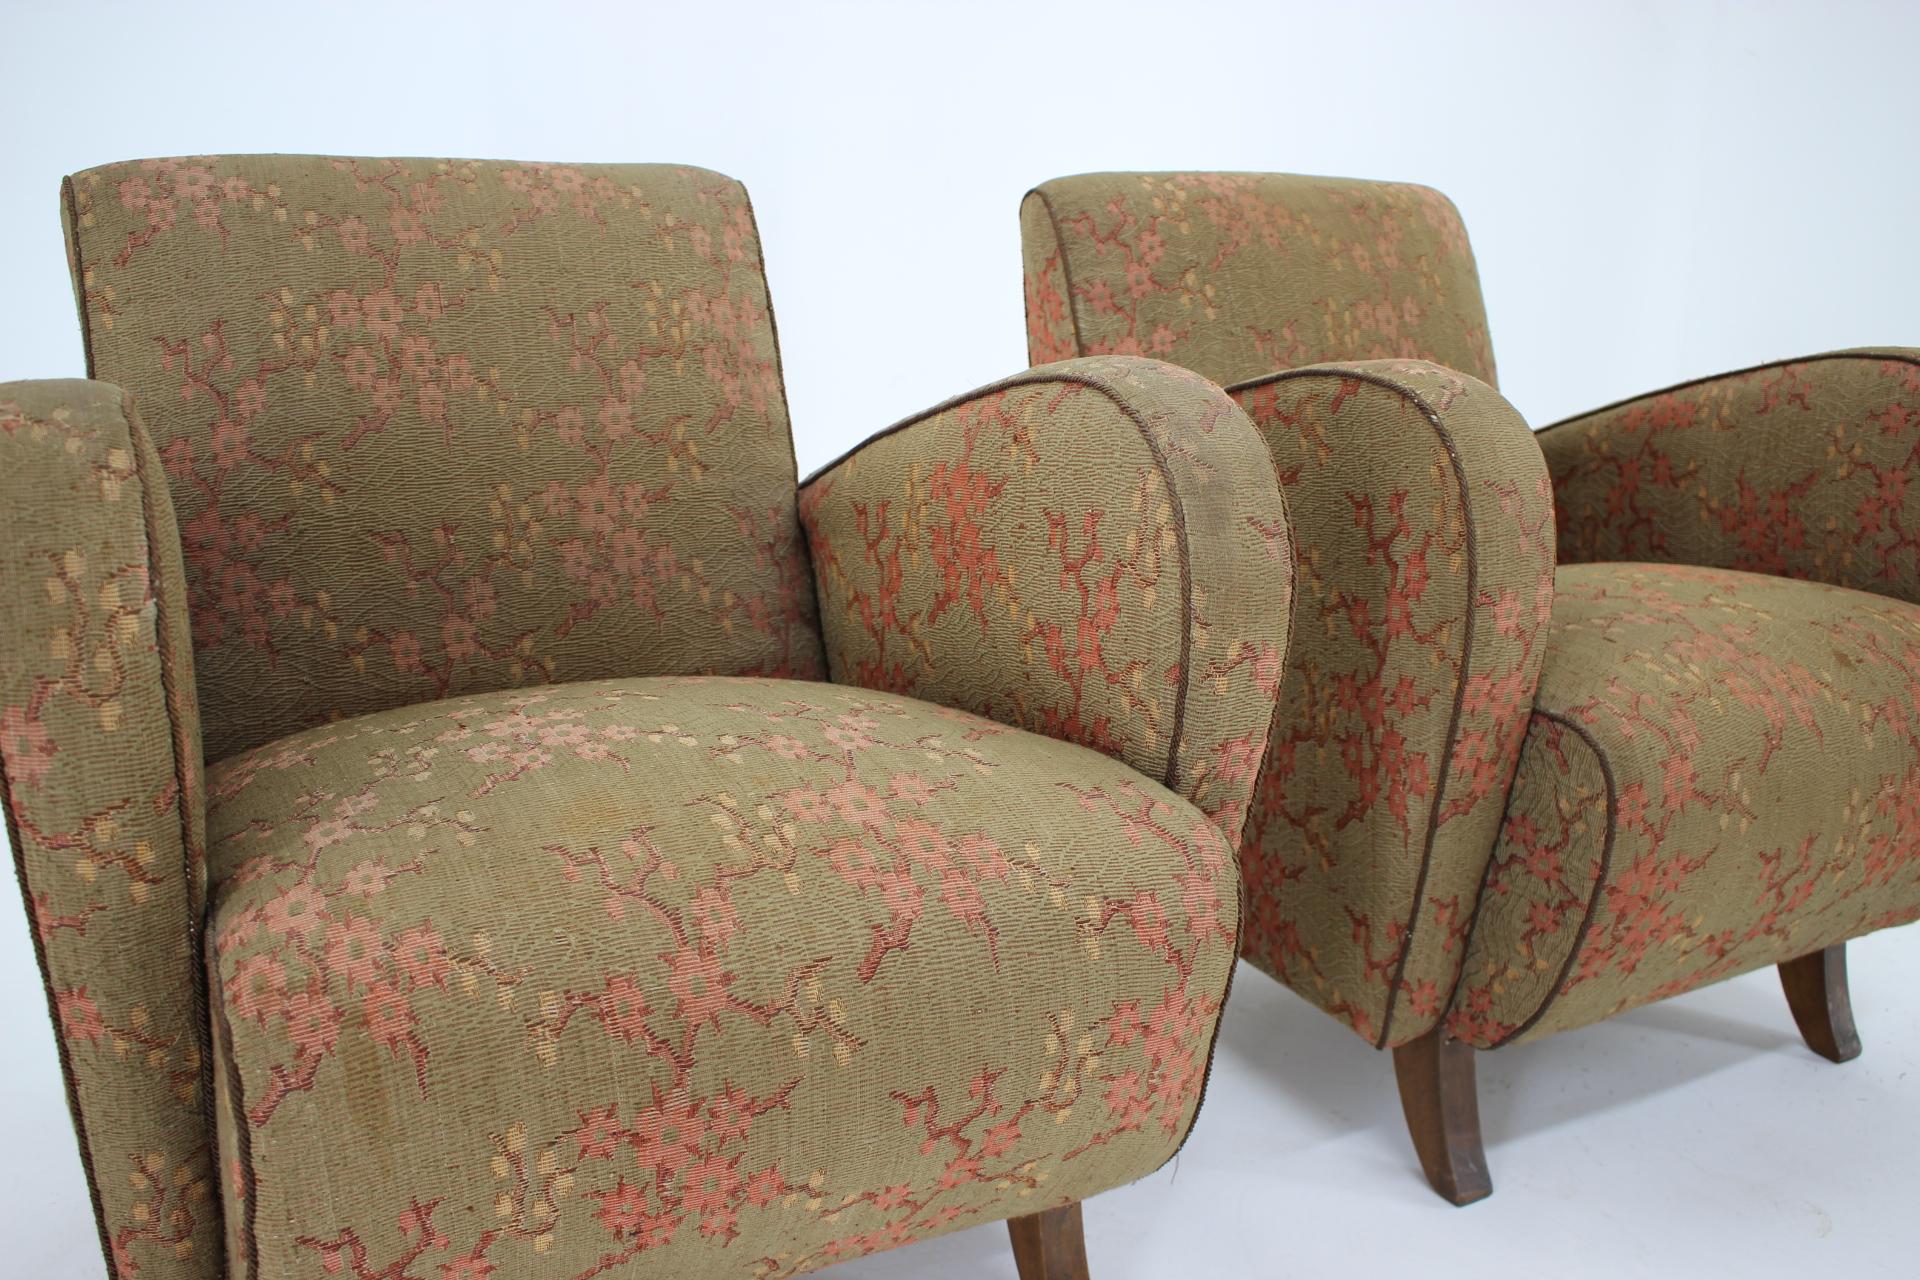 Upholstery Set of Two Very Rare Art Deco Armchairs H-283 by Jindřich Halabala, 1930s